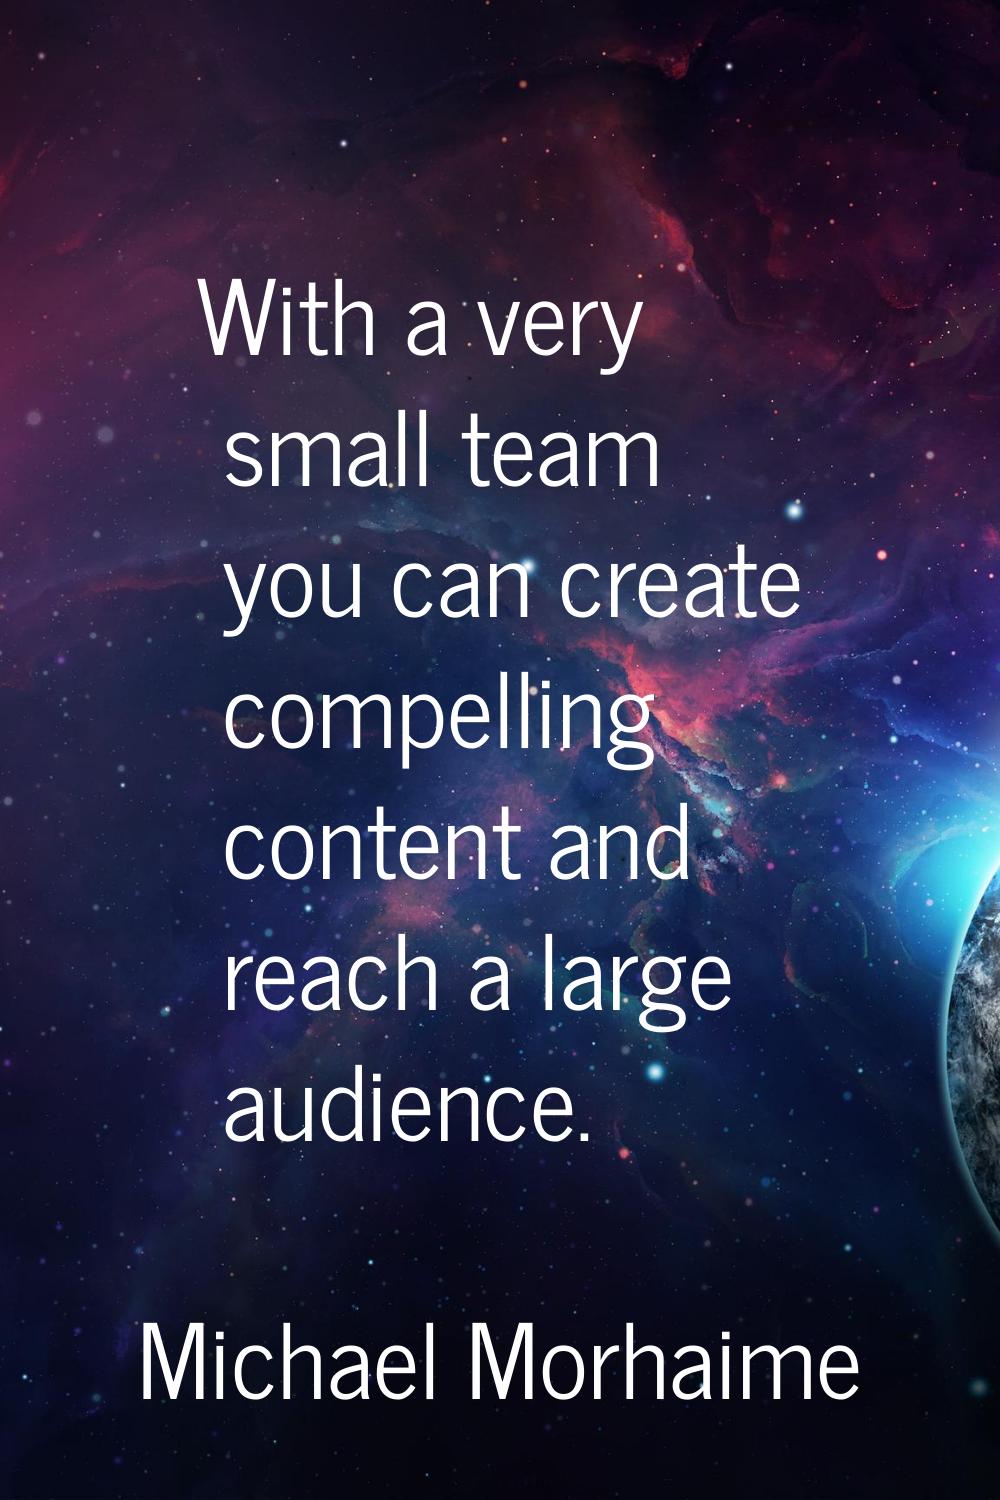 With a very small team you can create compelling content and reach a large audience.